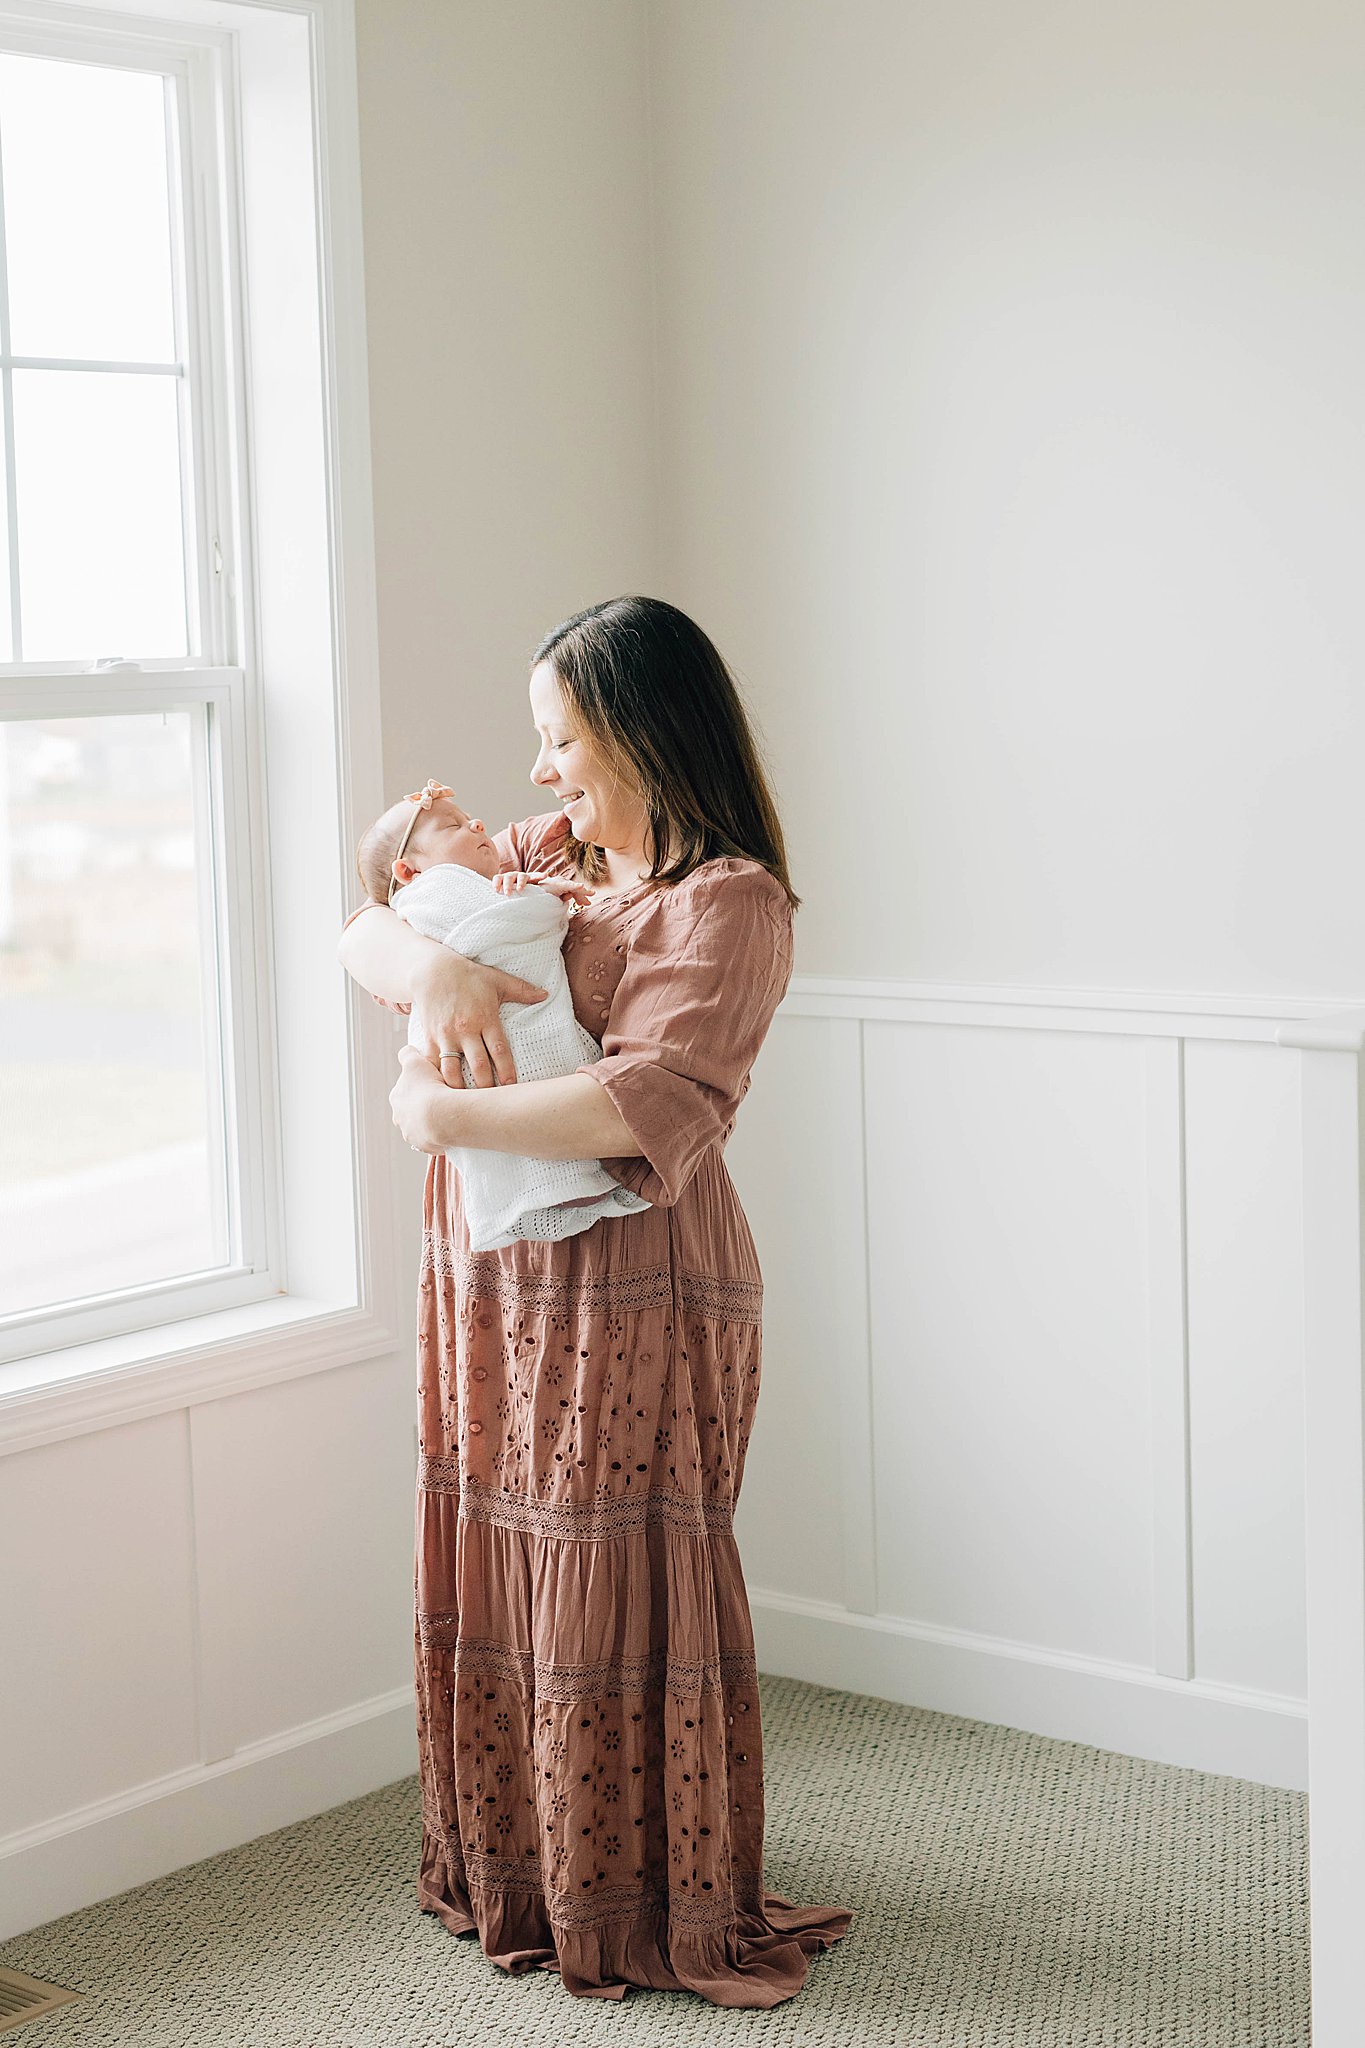 Mom and newborn by window, with mom wearing long dress for outfit for newborn photos. 